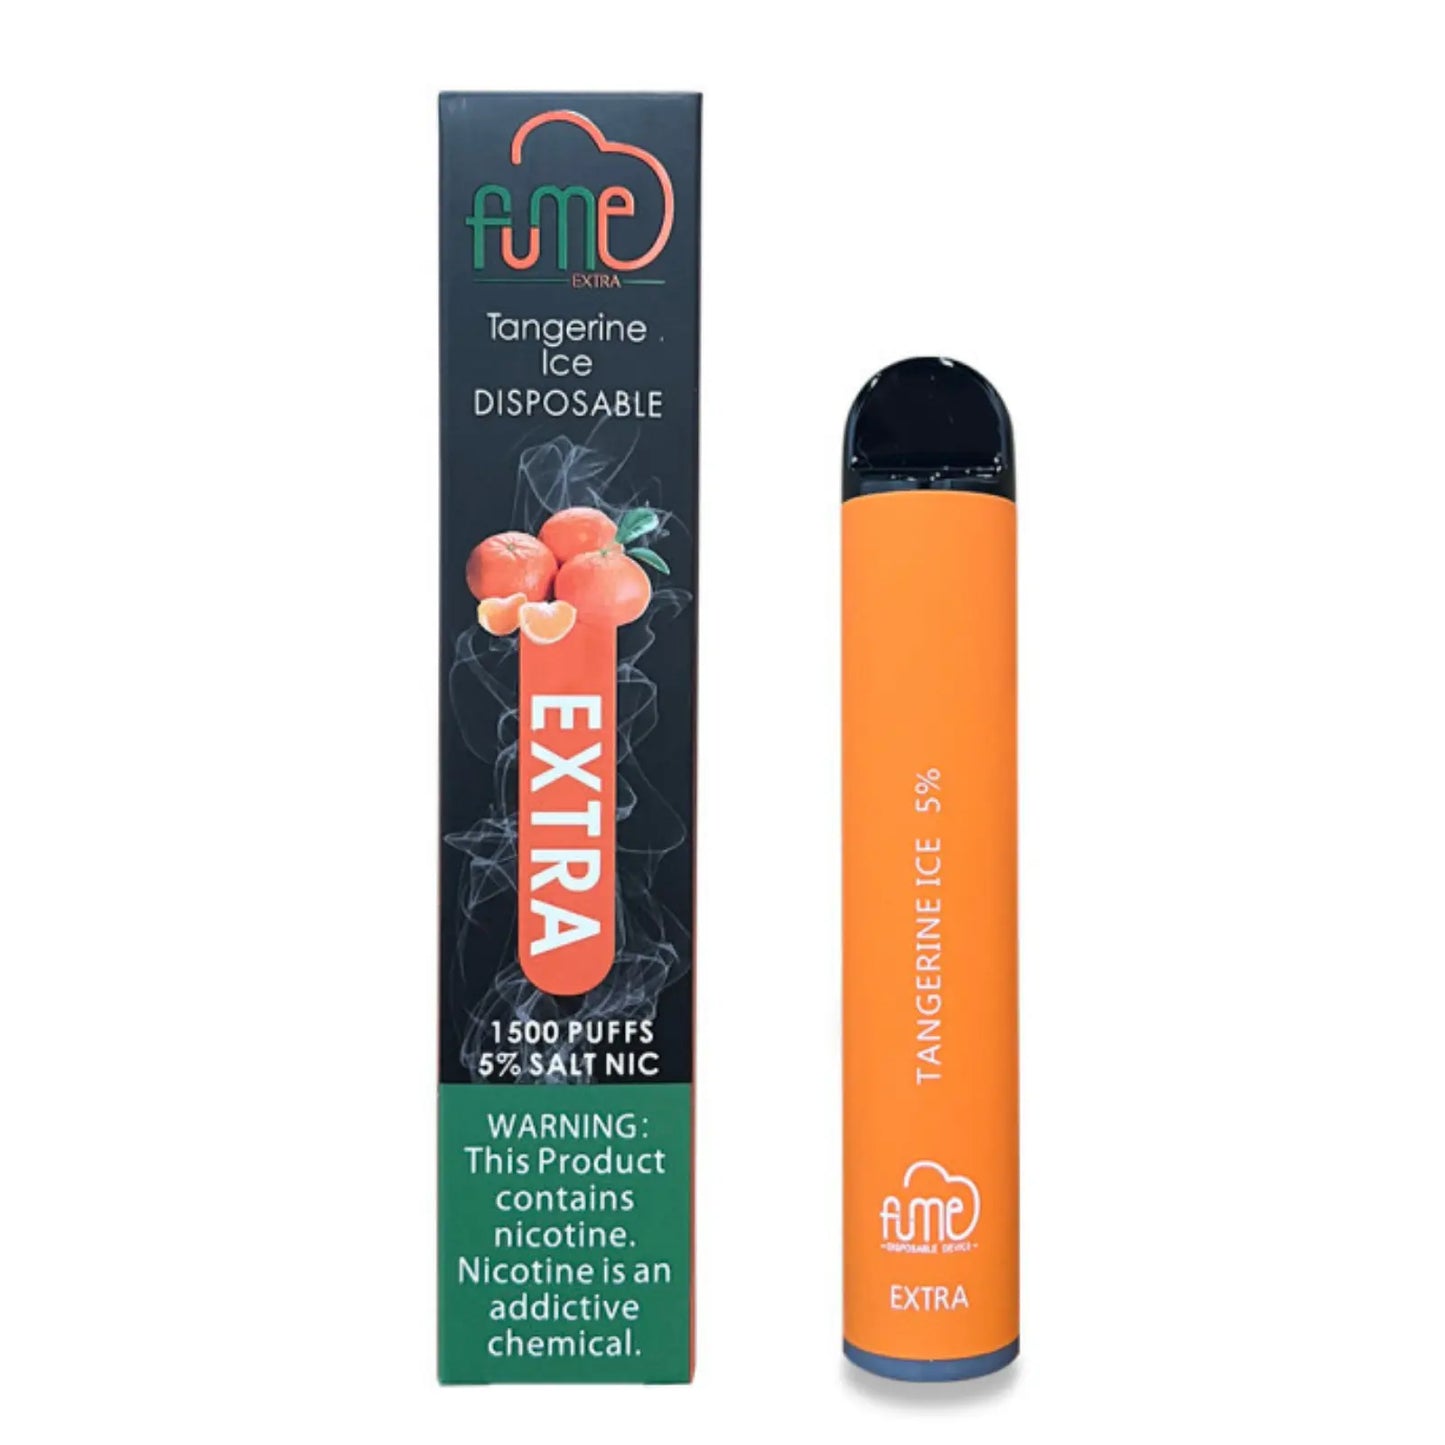 Fume Extra Disposable 1500 Puffs - Tangerine Ice